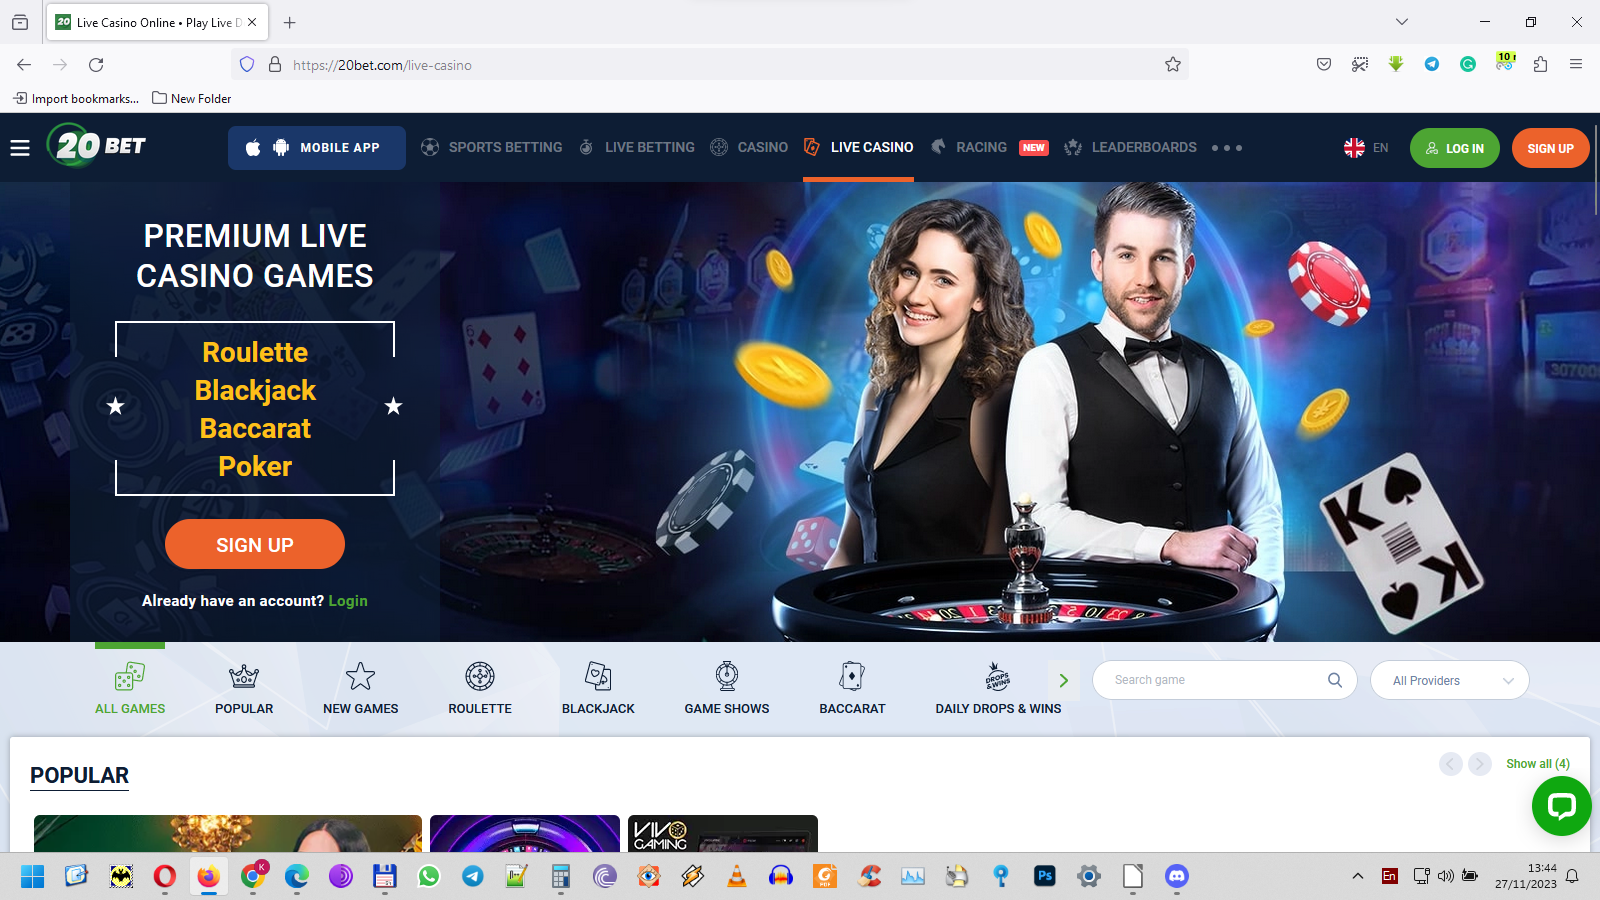 The most popular games at 20Bet casino